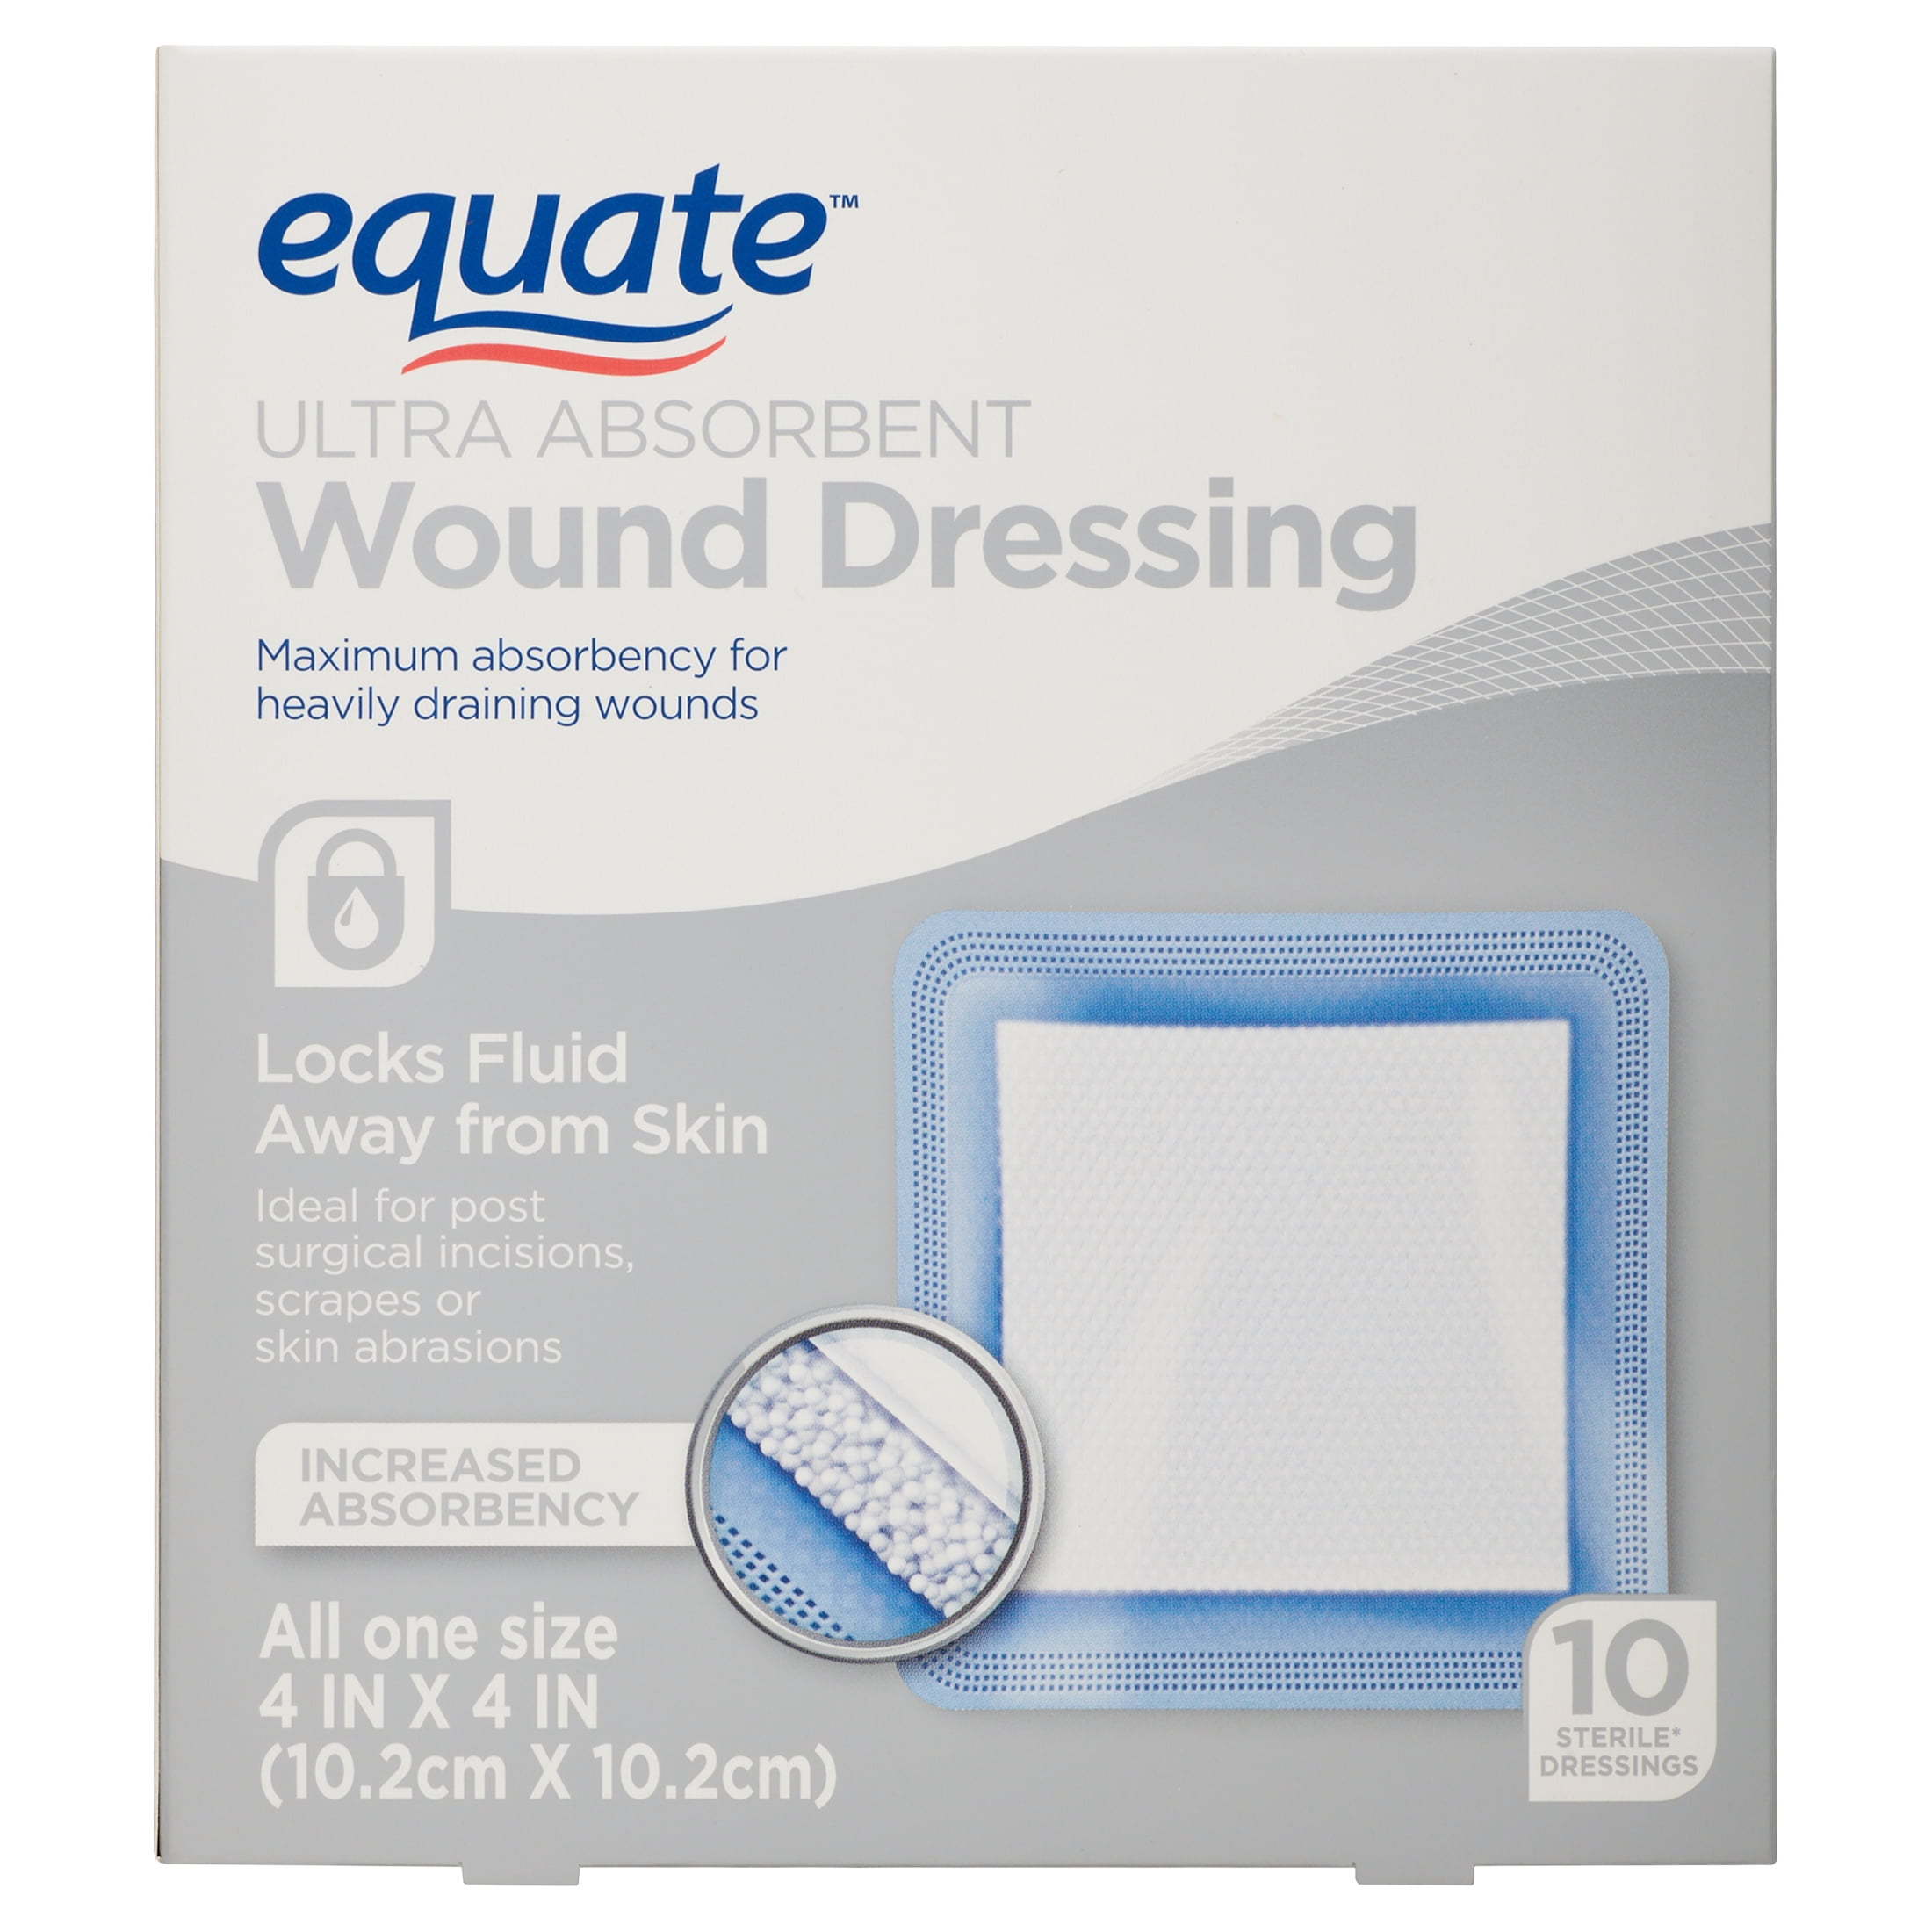 Equate Ultra Absorbent Wound Dressing, 10 Count